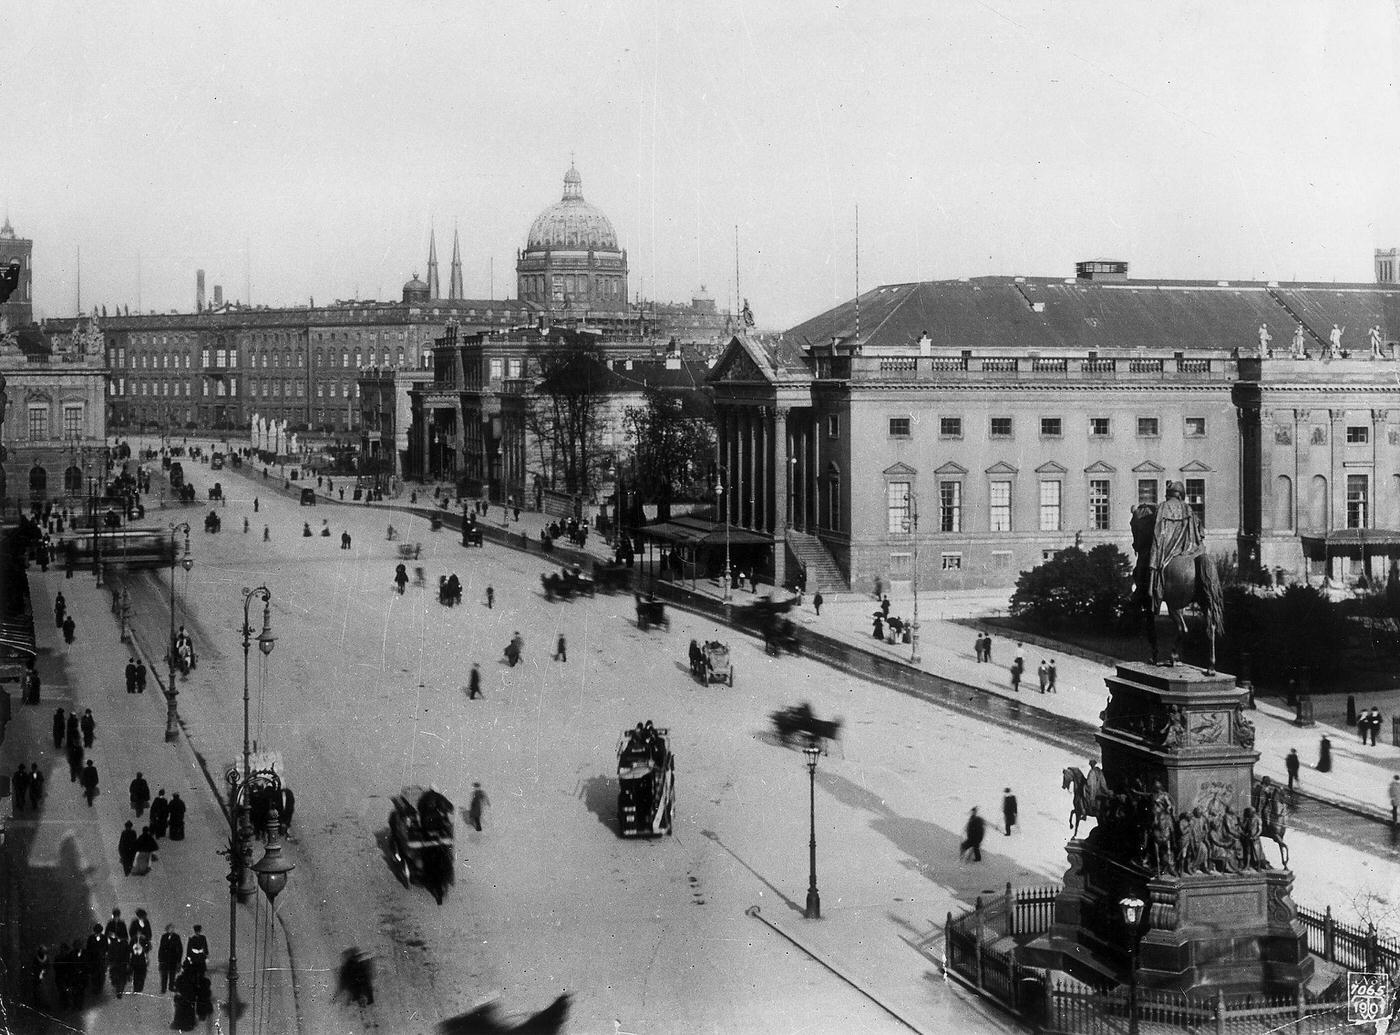 View over the Royal Opera House, Kronprinzenpalais, and Stadtkommandantur to the City Palace in Berlin, 1901